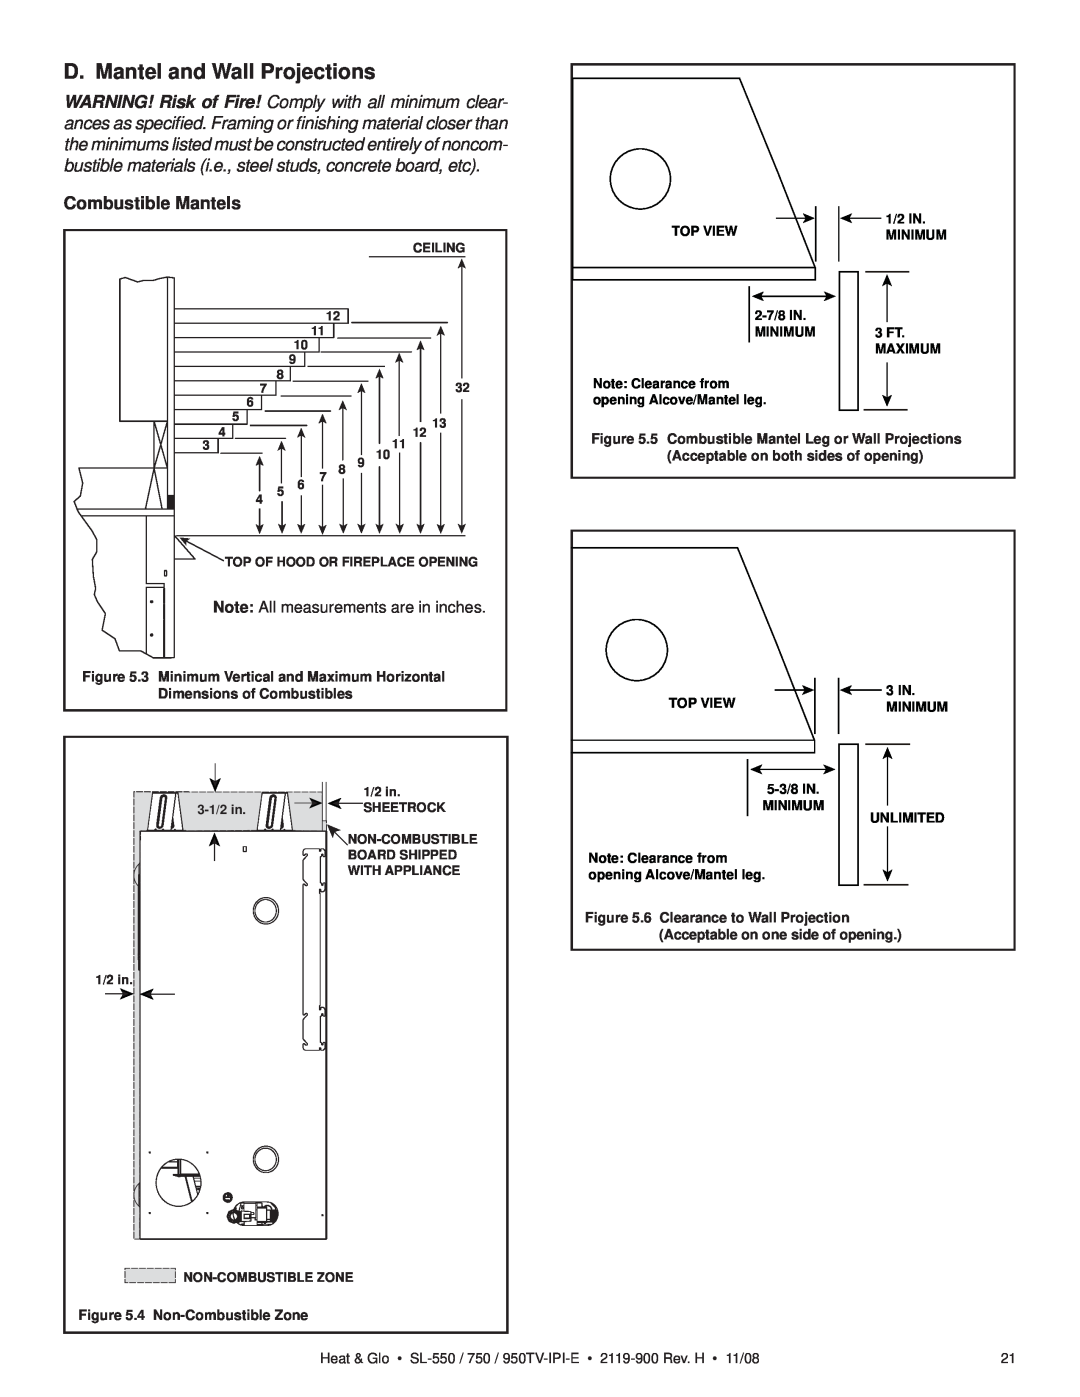 Hearth and Home Technologies SL-750TV-IPI-E D. Mantel and Wall Projections, Combustible Mantels, 4 Non-Combustible Zone 